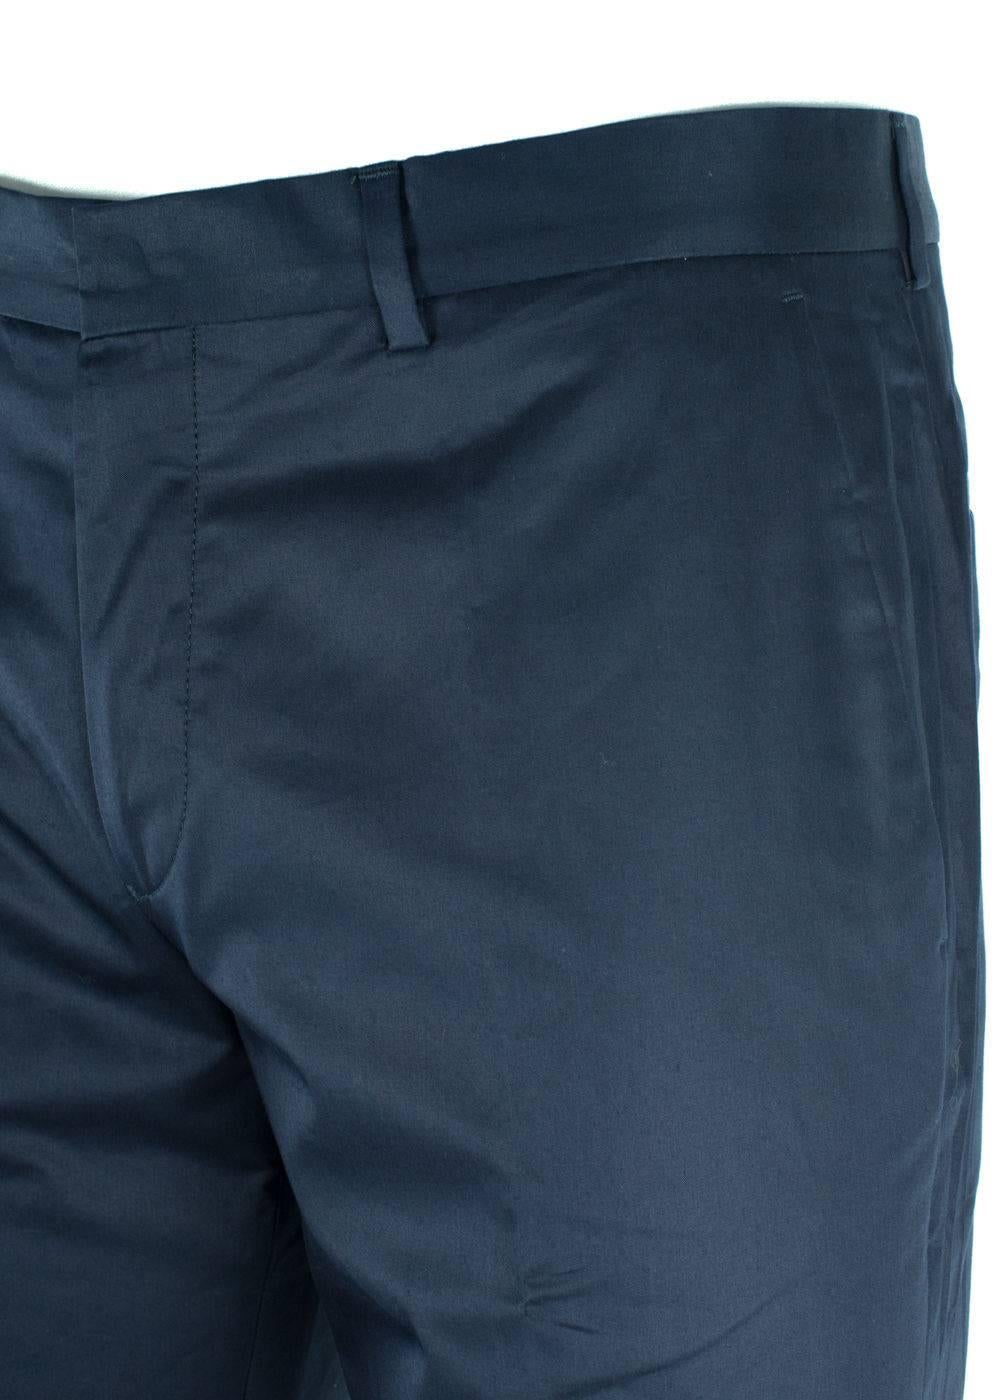 Brand New Givenchy Men's Trousers
Original Tag
Retails in Stores & Online for $390
Men's Size E50 / US34 Fits True to Size

Givenchy's take on a classic pair of navy trousers for those professional settings and important events. Made with 100%